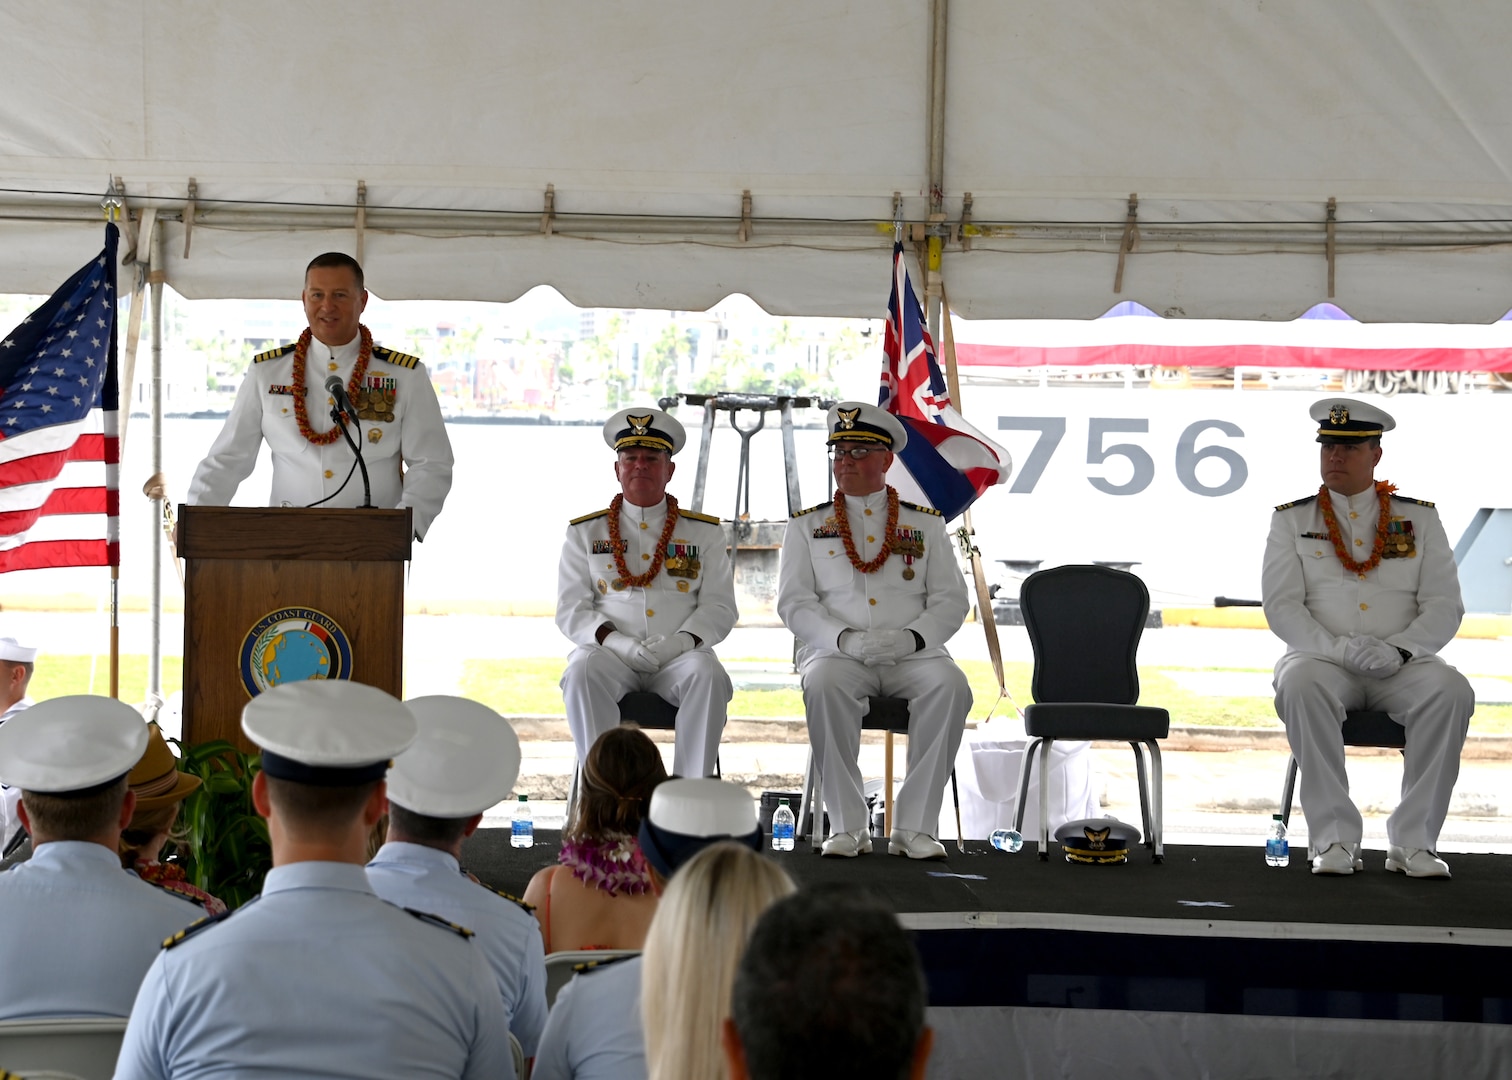 Capt. Bob Kinsey delivers remarks during the U.S. Coast Guard Cutter Kimball’s (WMSL 756) change of command ceremony on Base Honolulu, July 21, 2023. Rear Adm. Brendan C. McPherson, deputy commander of U.S. Coast Guard Pacific Area, presided over the ceremony in which Kinsey relieved Capt. Tom D’Arcy as Kimball’s commanding officer. U.S. Coast Guard photo by Chief Petty Officer Matthew Masaschi.